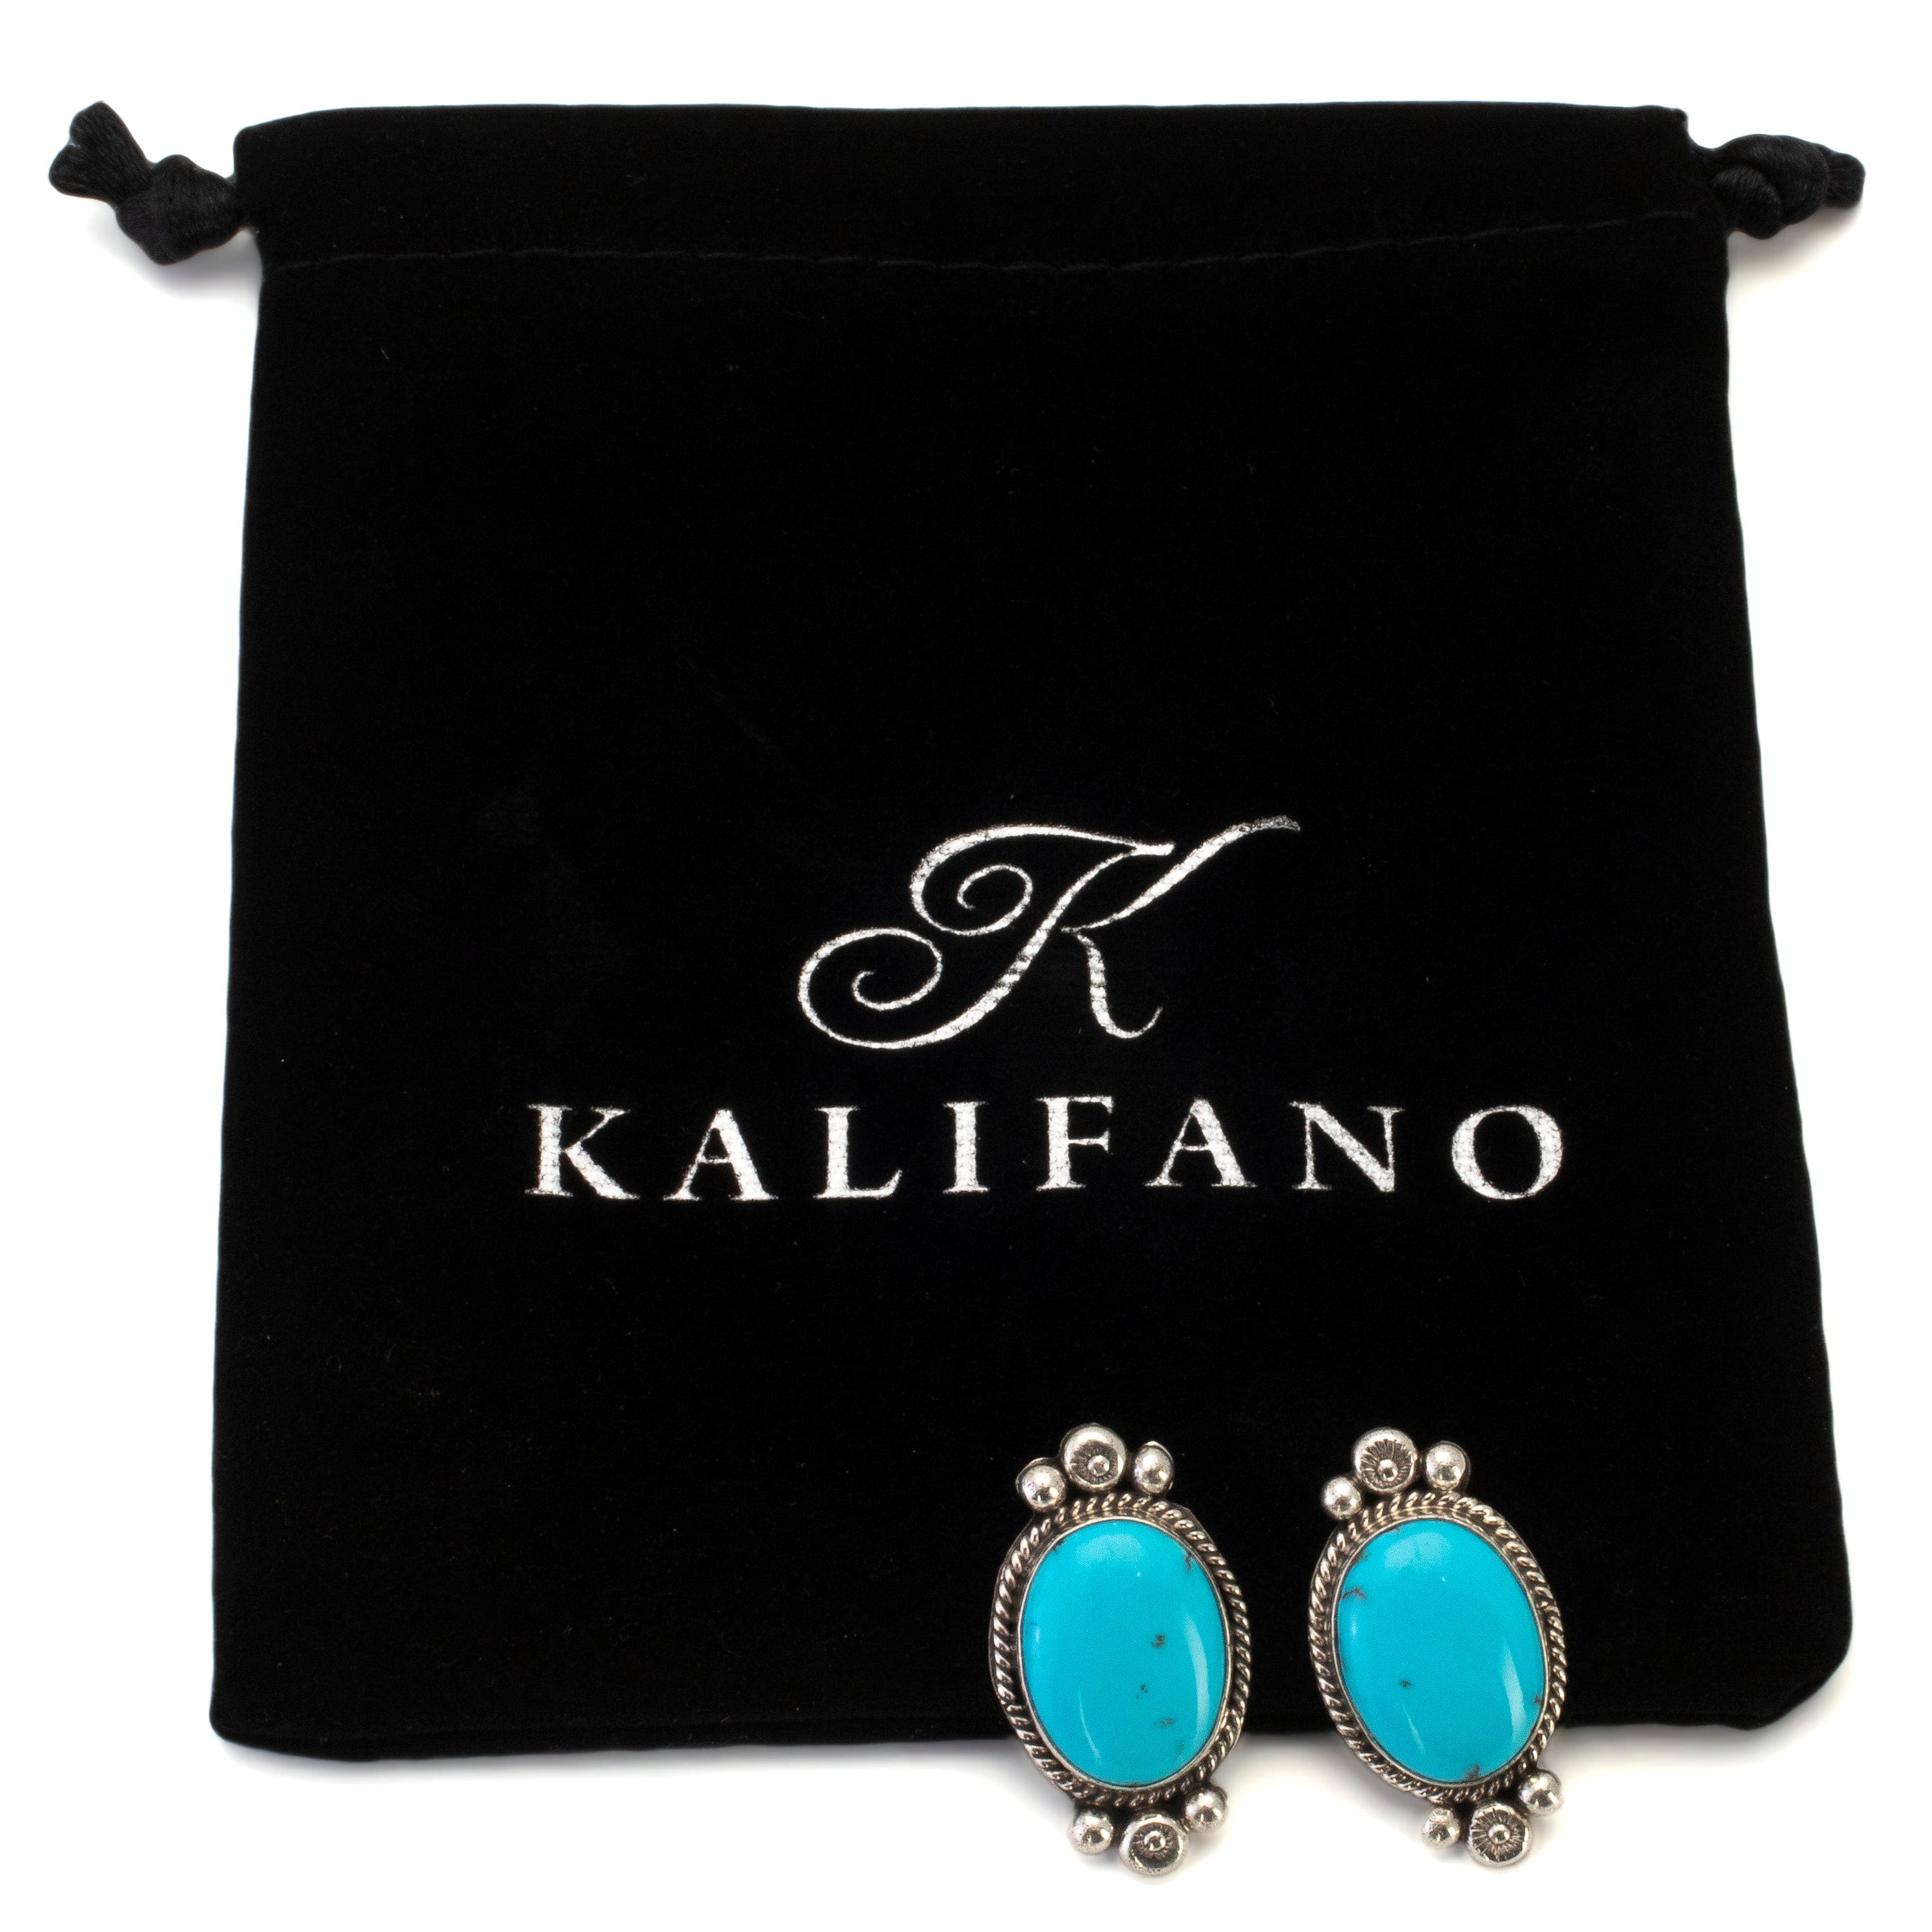 Kalifano Native American Jewelry Abellene Bah Navajo Kingman Turquoise Oval USA Native American Made 925 Sterling Silver Earrings with Stud Backing NAE600.010